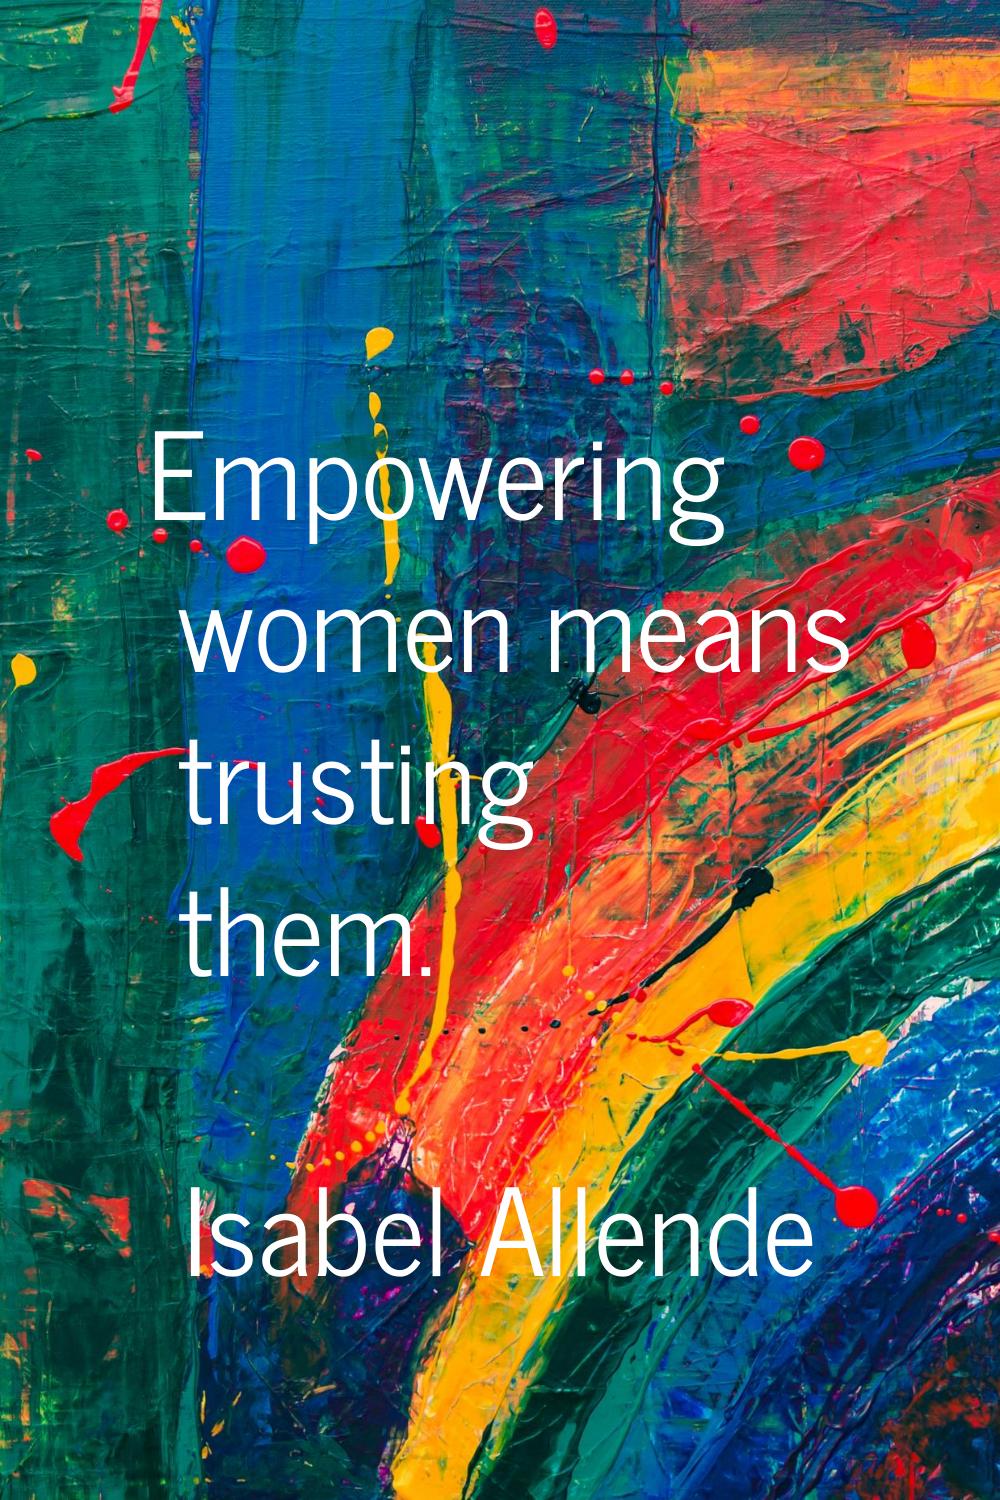 Empowering women means trusting them.